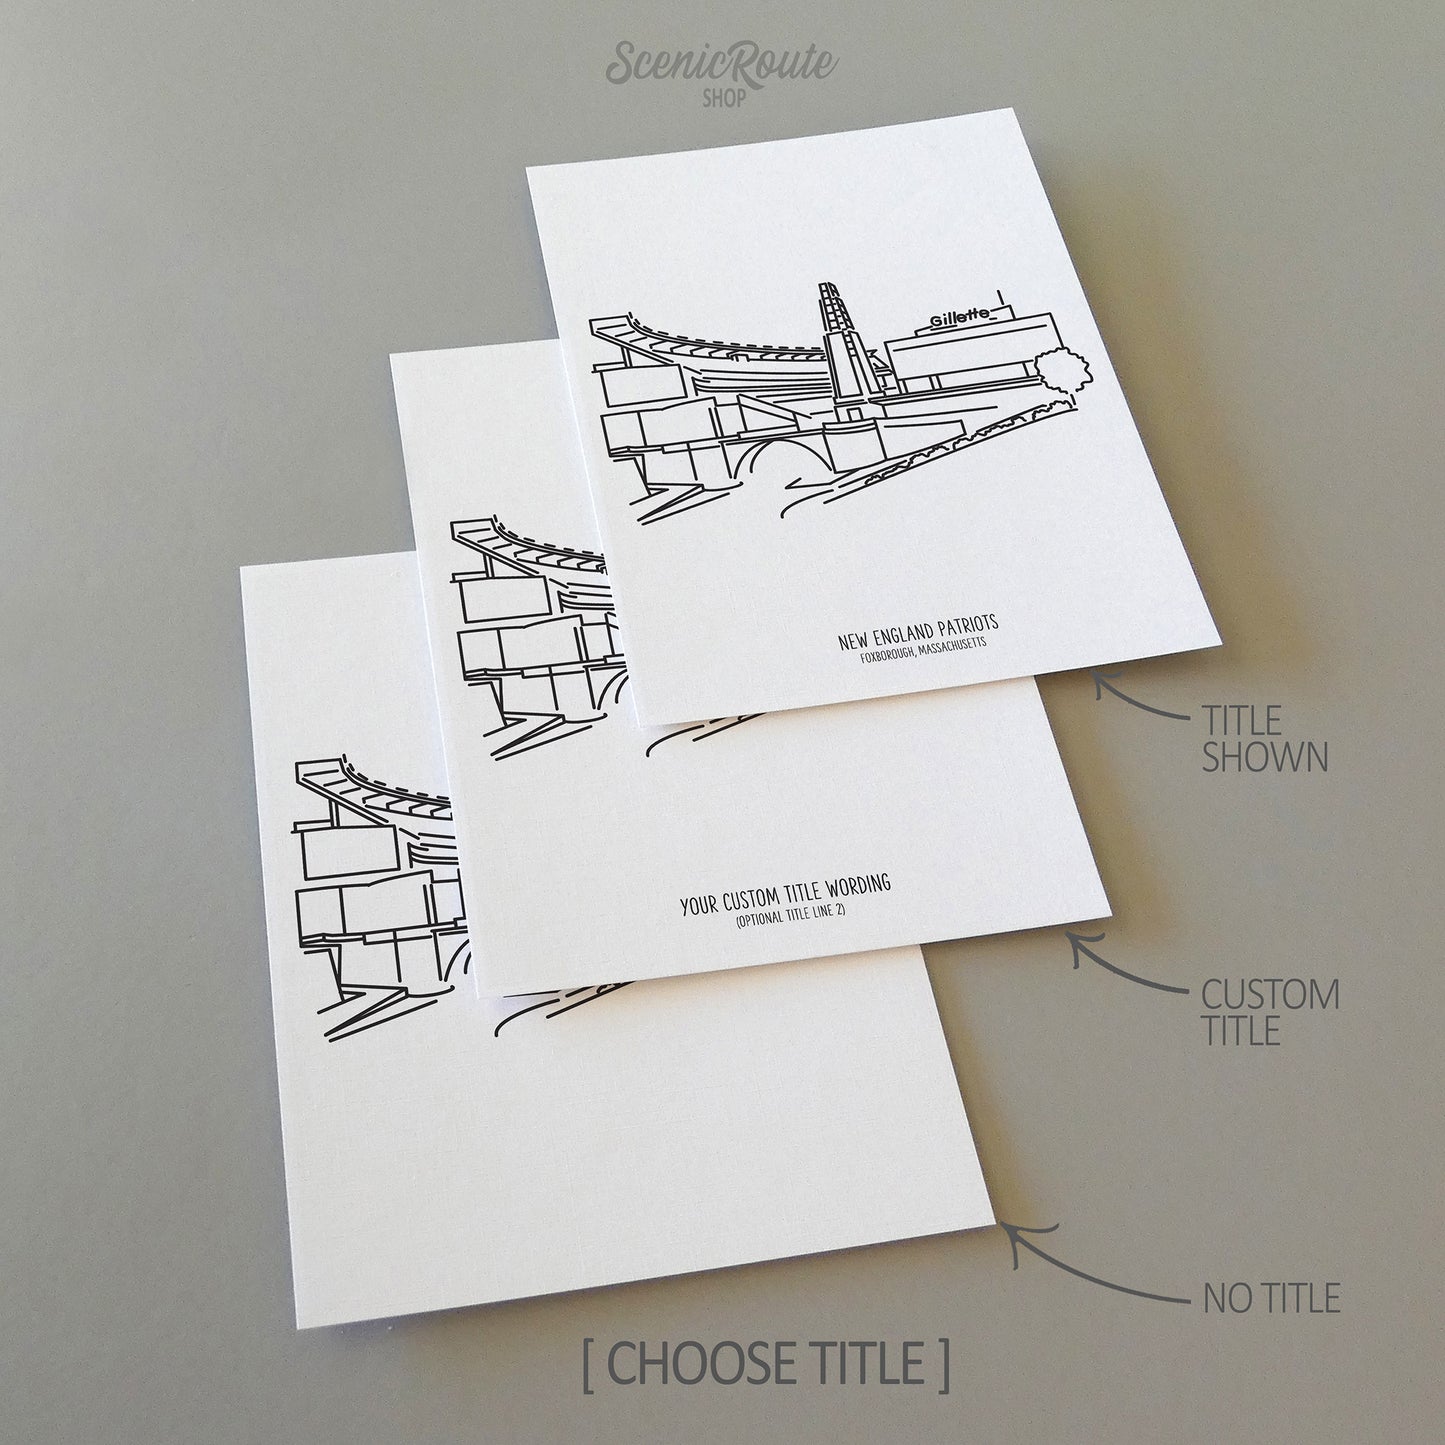 Three line art drawings of the New England Patriots Stadium on white linen paper with a gray background.  The pieces are shown with title options that can be chosen and personalized.